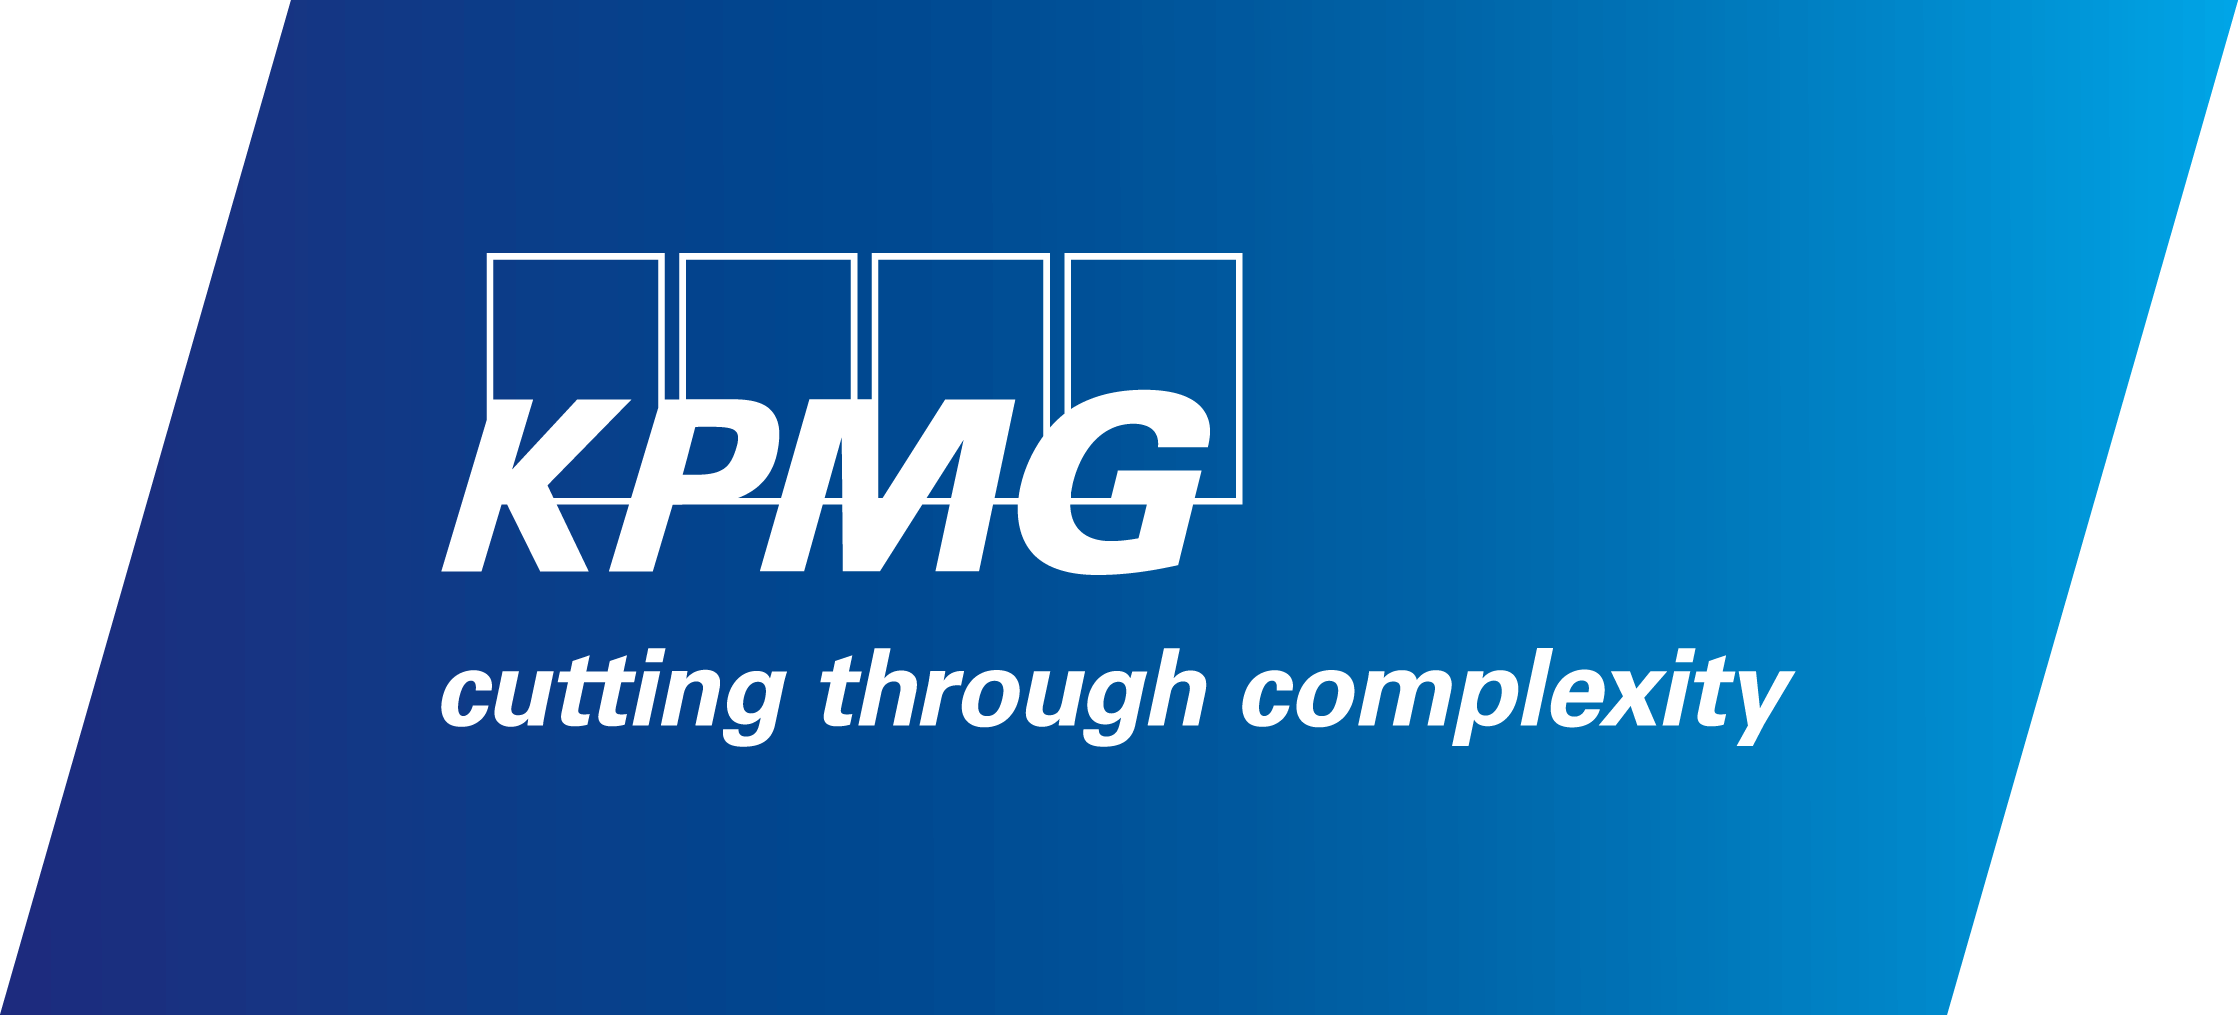 Featured image for “Great Opportunity for Students: USC KPMG 2017 Advisory Information Session”